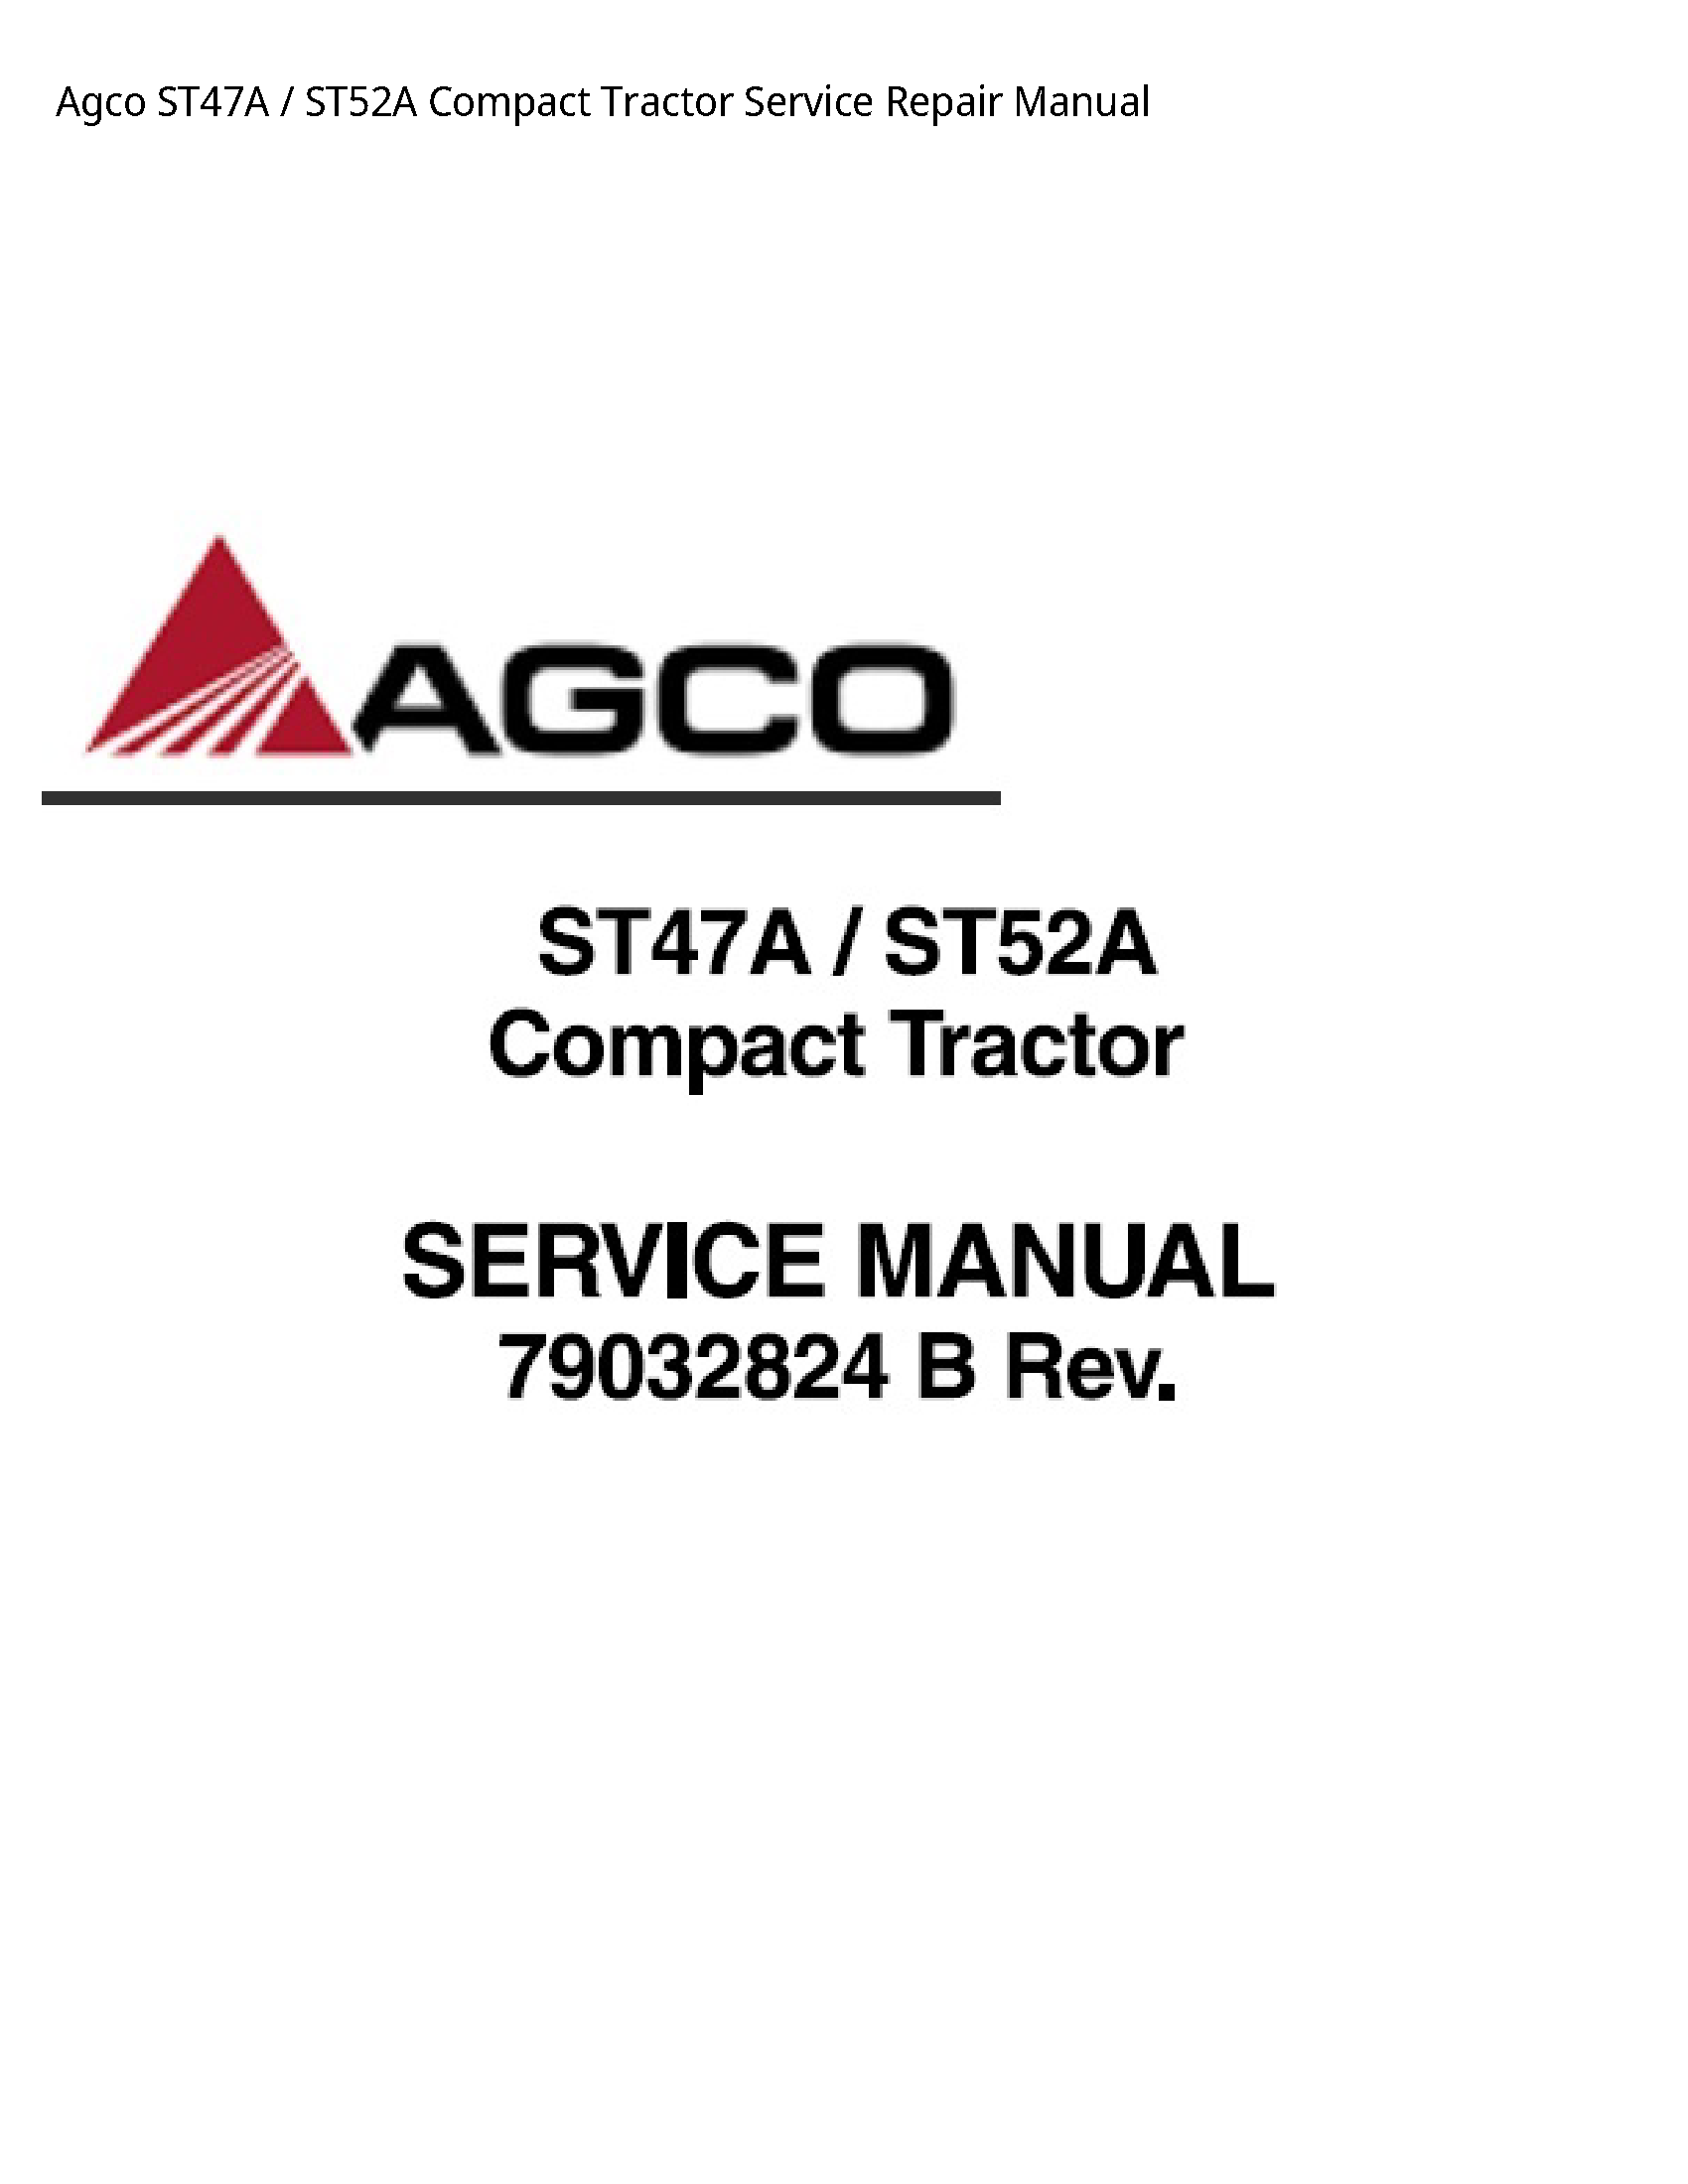 AGCO ST47A Compact Tractor manual